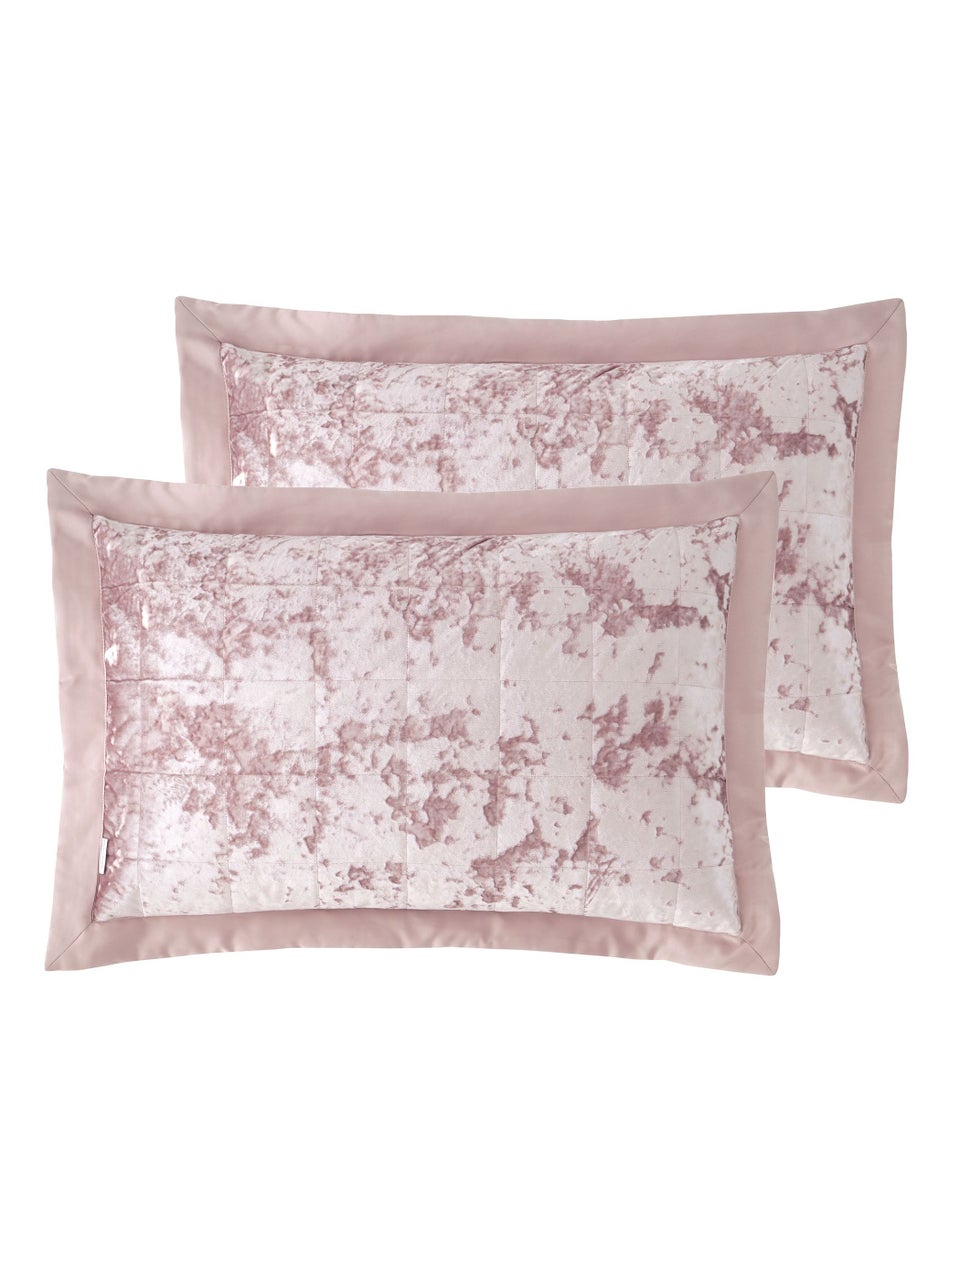 Catherine Lansfield Crushed Velvet Quilted Pillowcase Pair